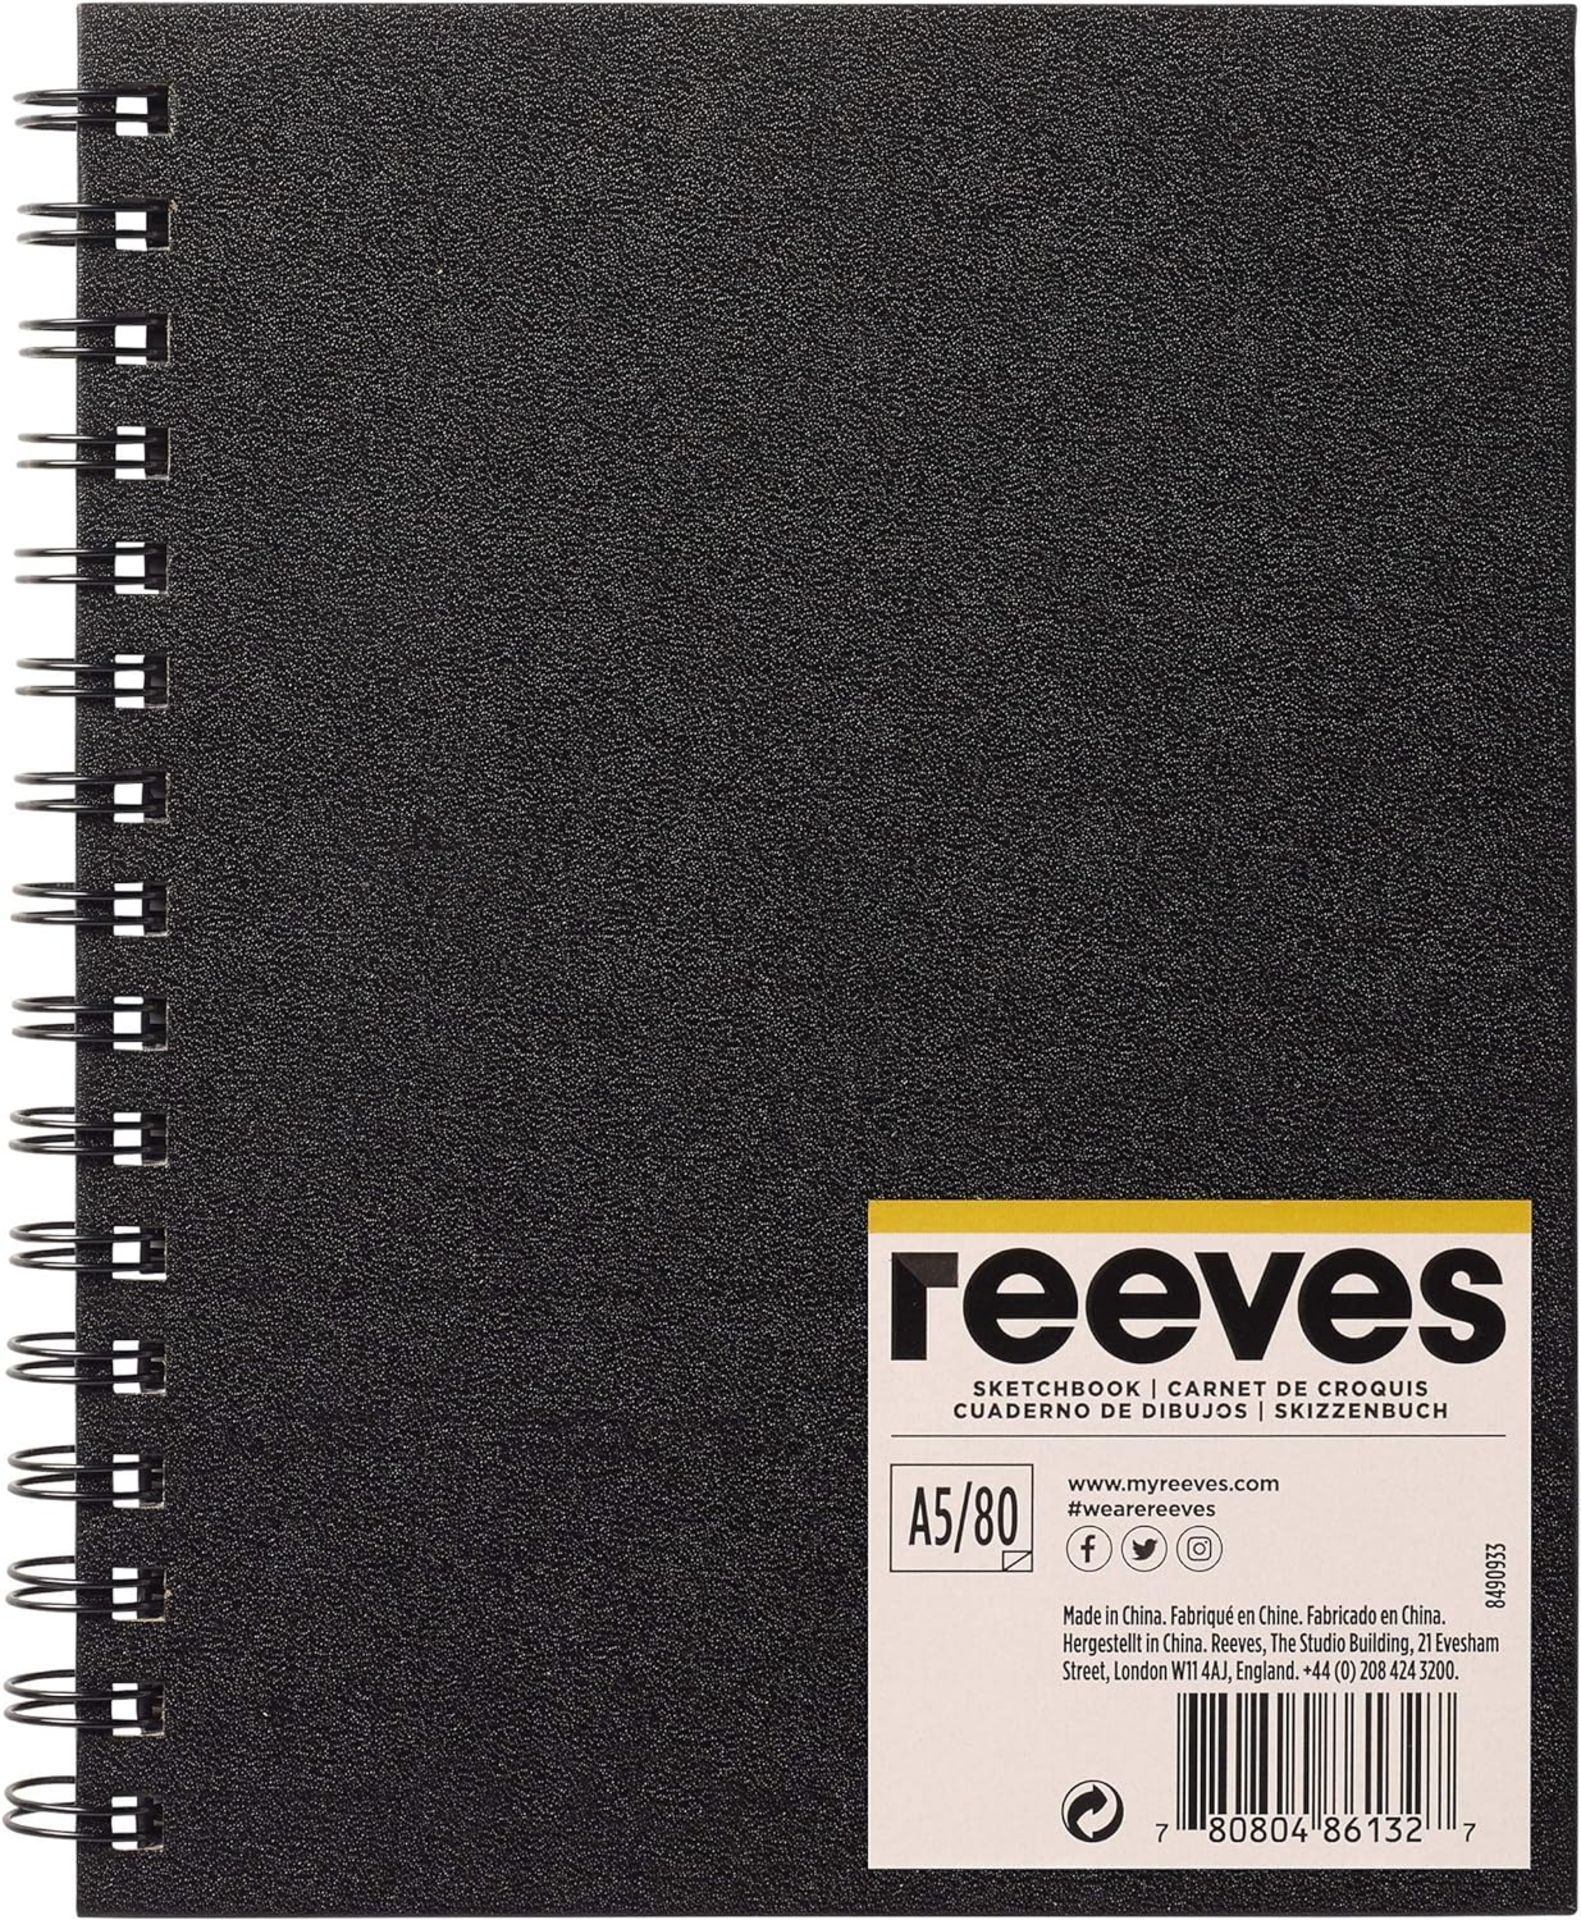 TRADE LOT TO CONTAIN 150x BRAND NEW REEVES Hardback Sketchbook A5 Spiral Bound with 80 Pages. RRP £